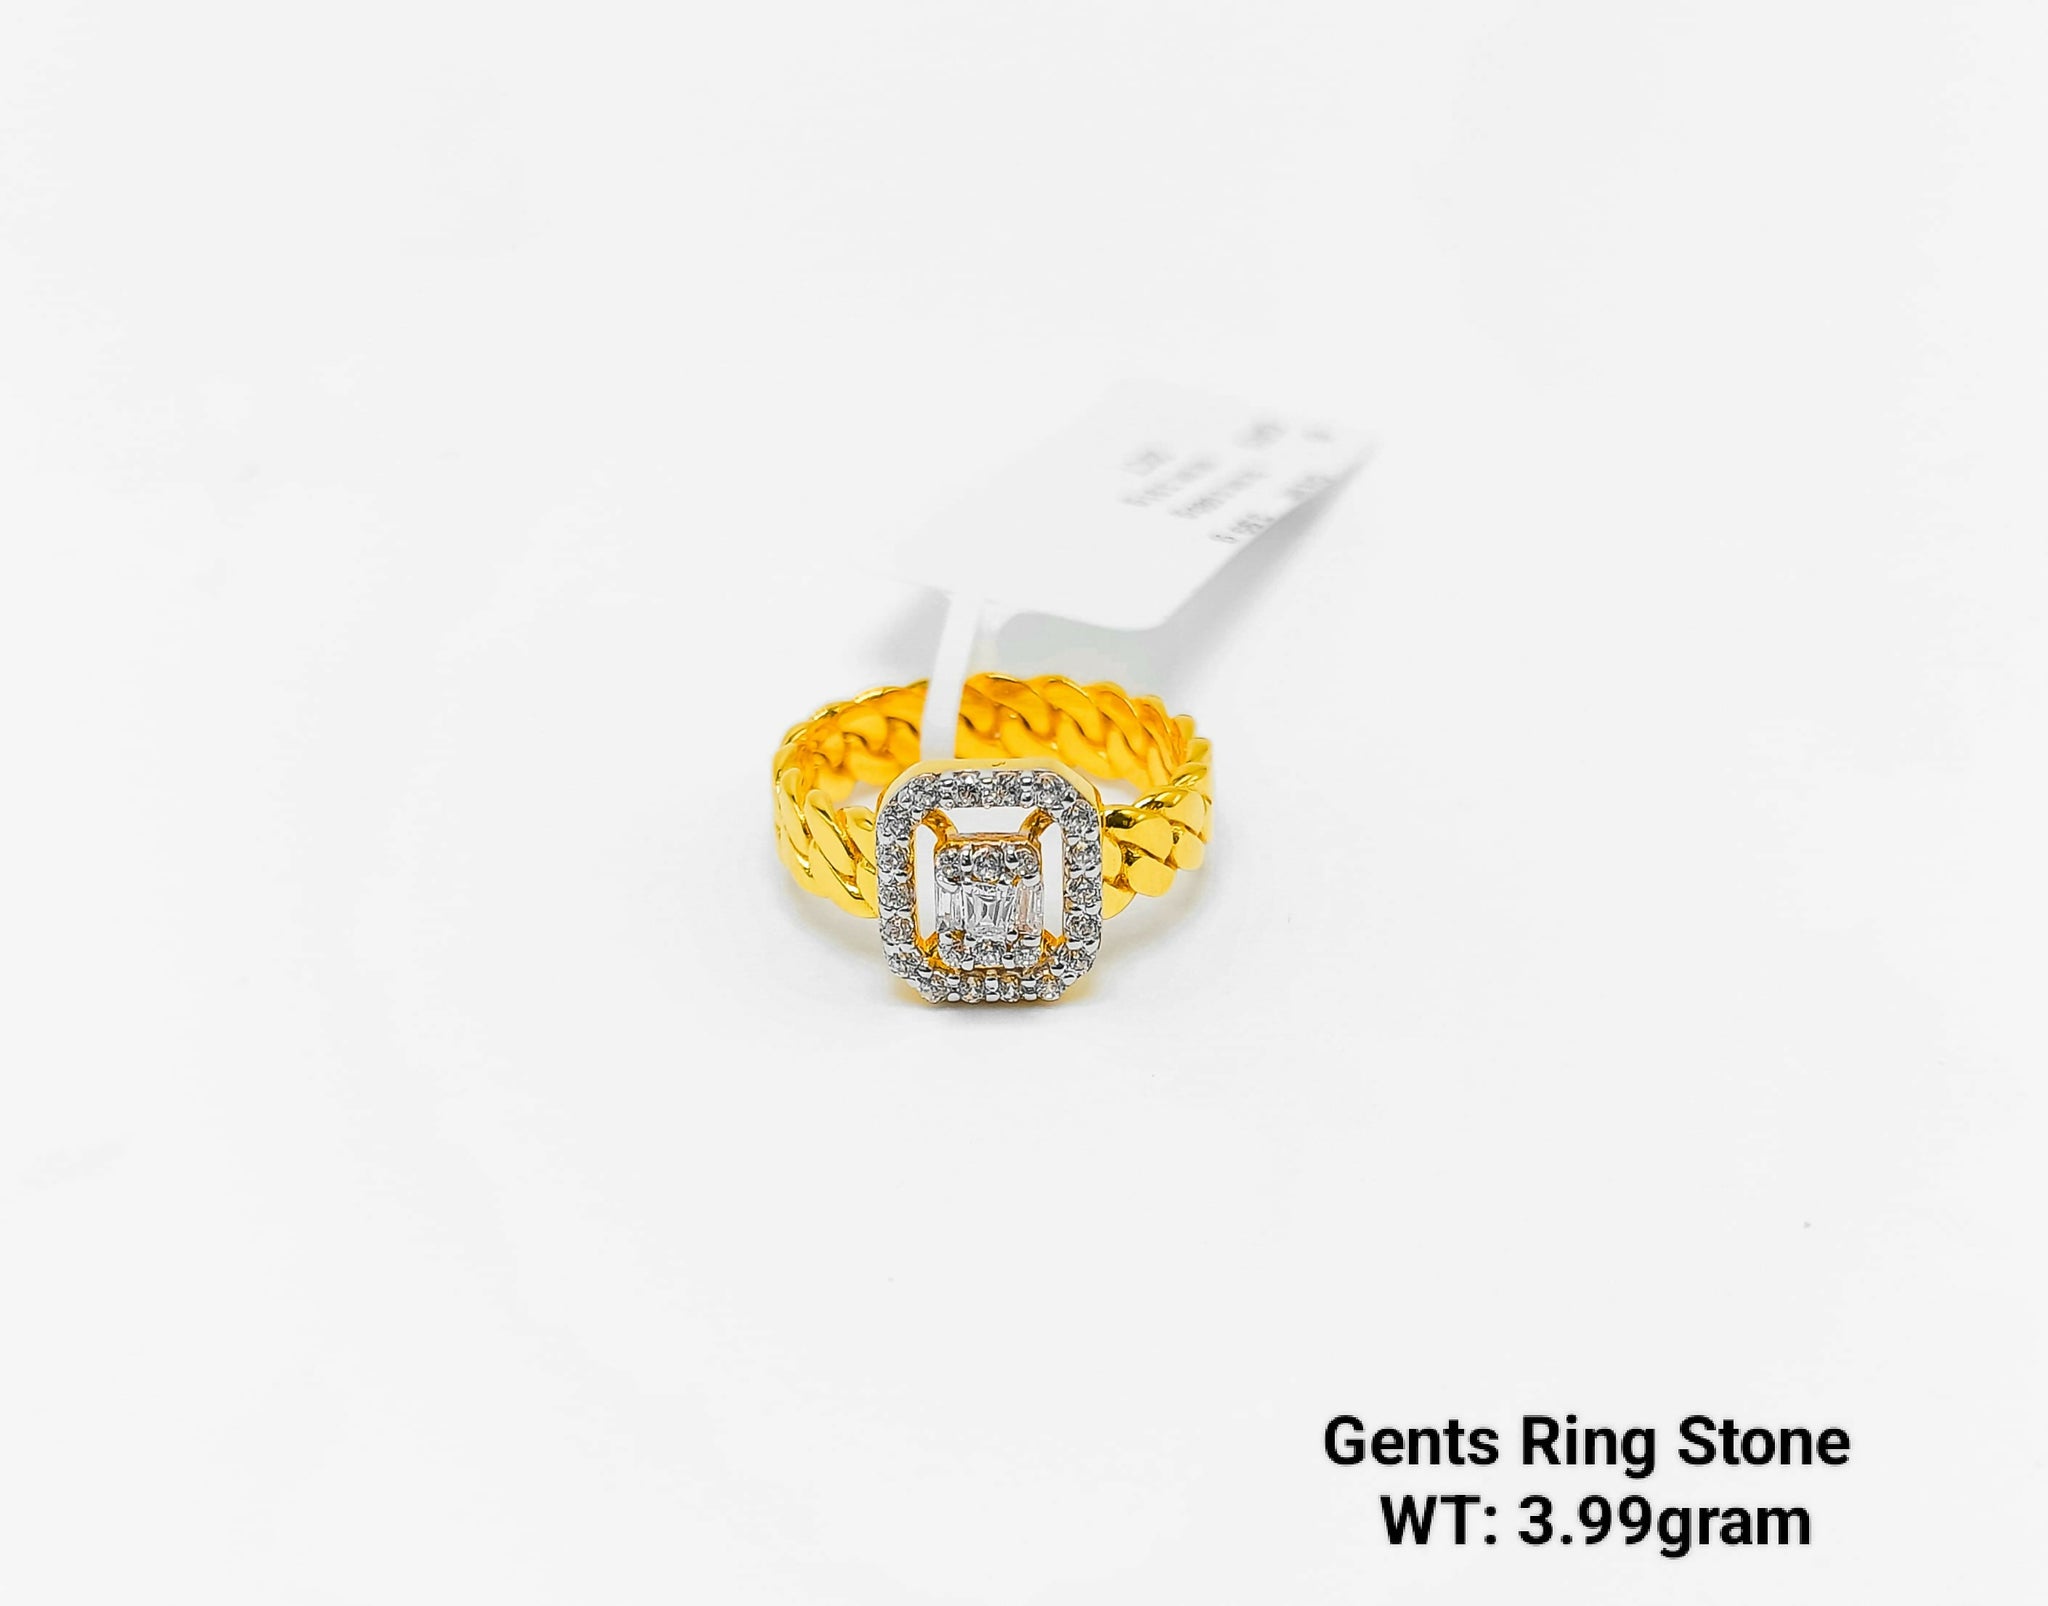 Gents Ring Stone